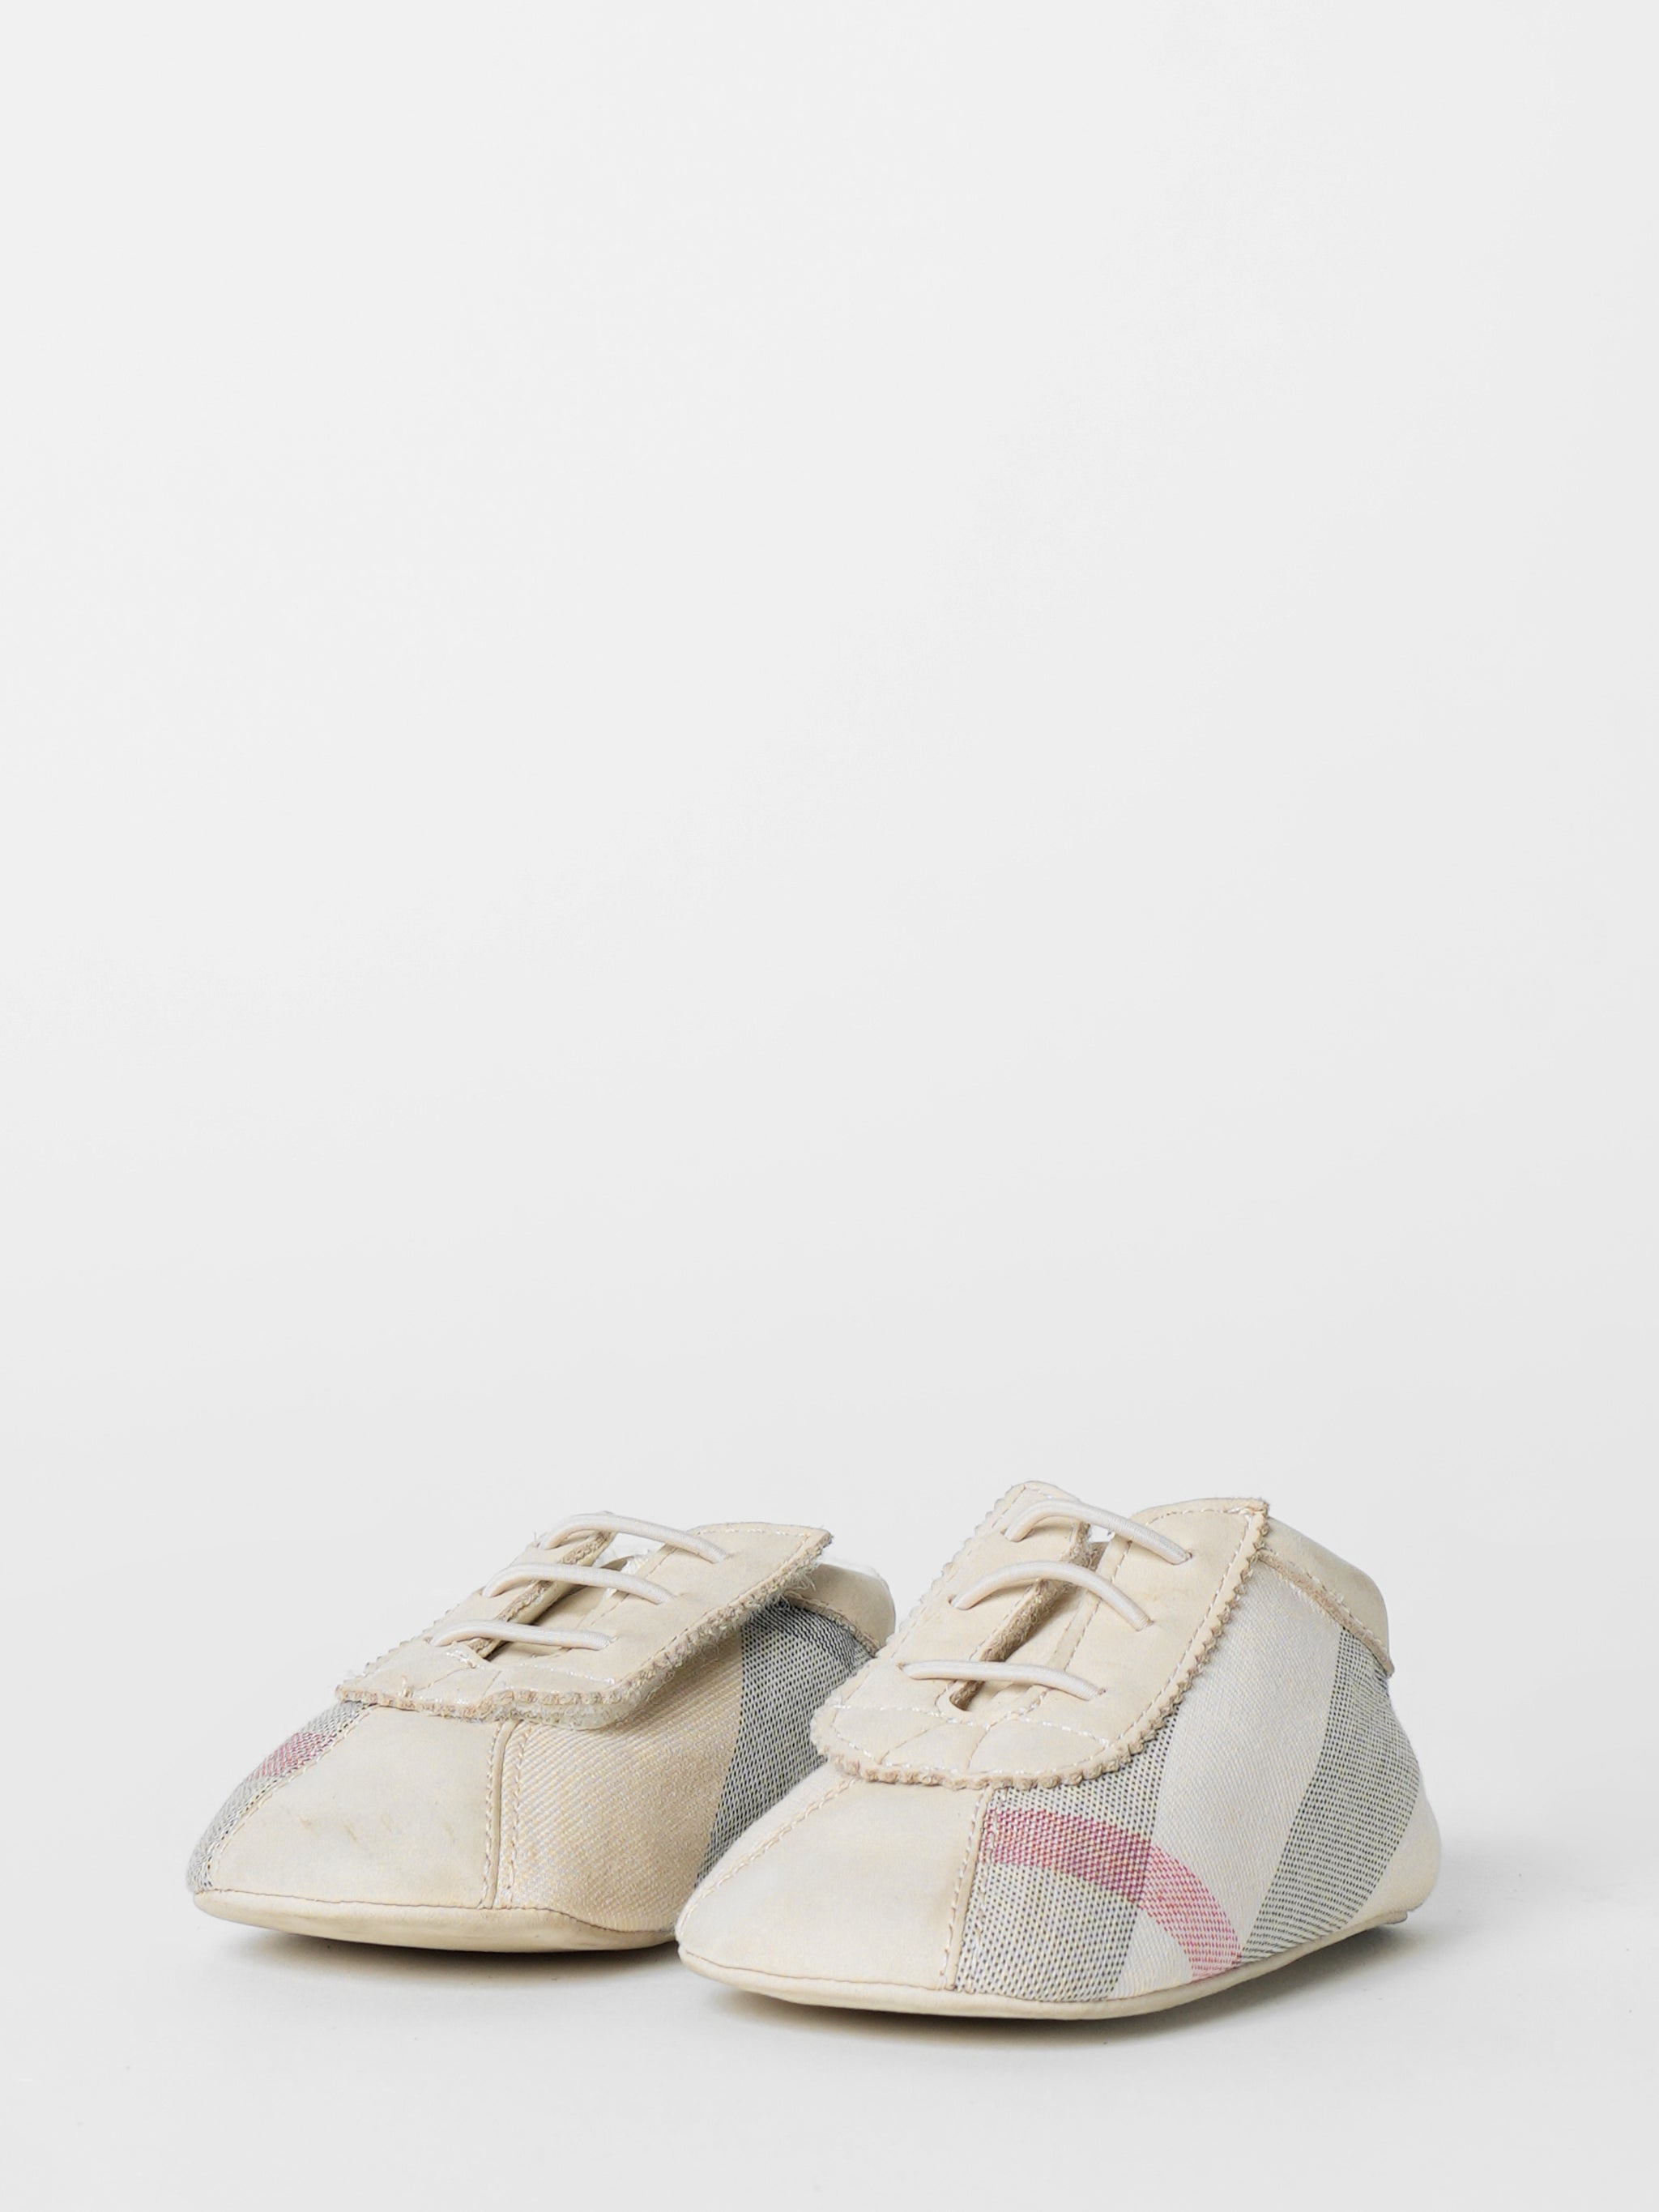 Burberry Infant Crib Shoes